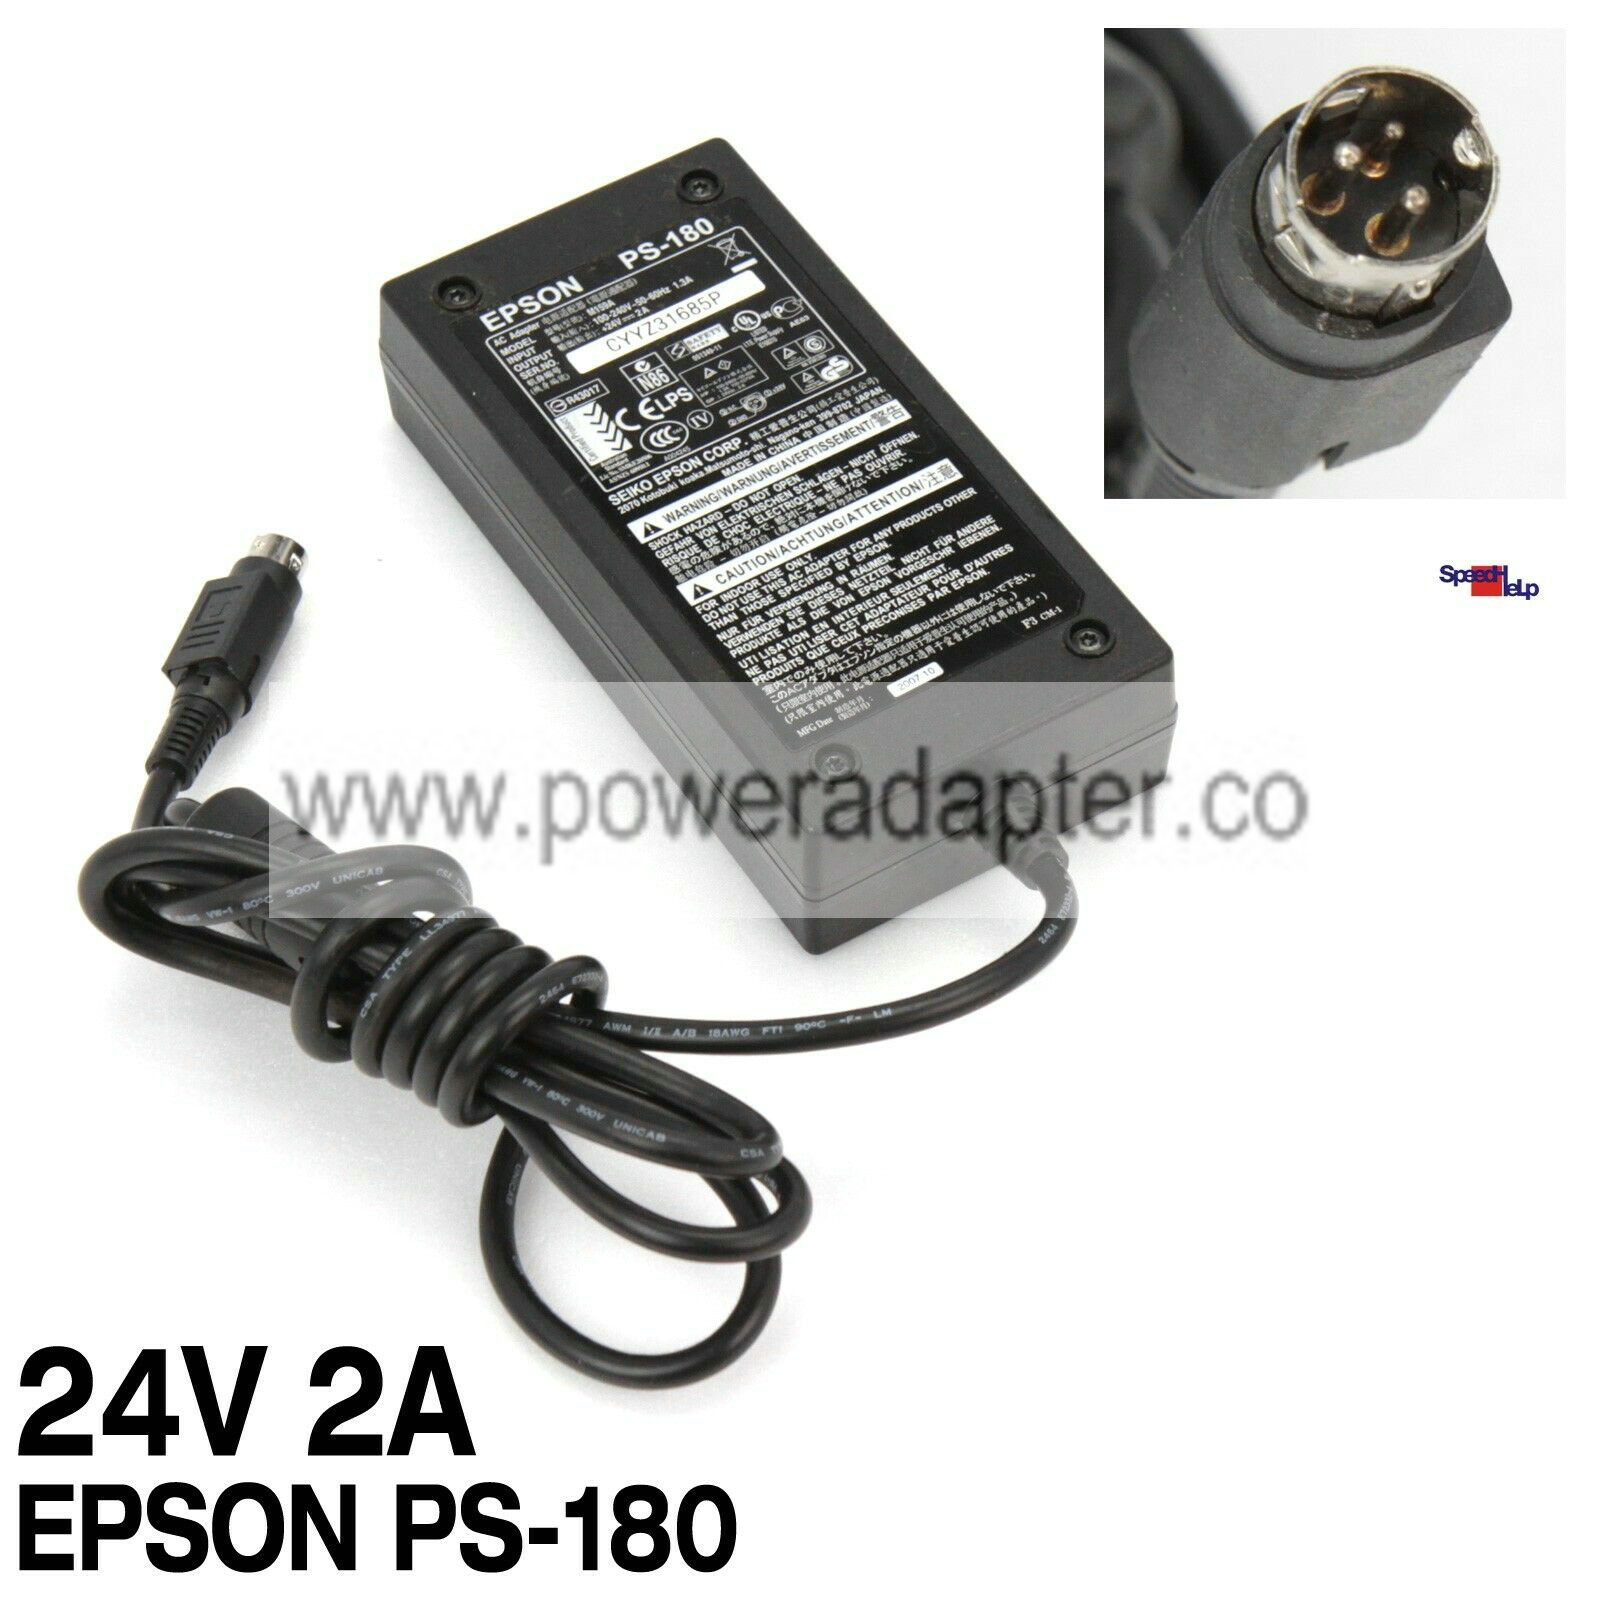 Original Epson PS-590 7/12ft159A 24V Power Supply 3-PIN Receipt Printer Wincor MPN: Does Not Apply EAN: 072938939 - Click Image to Close